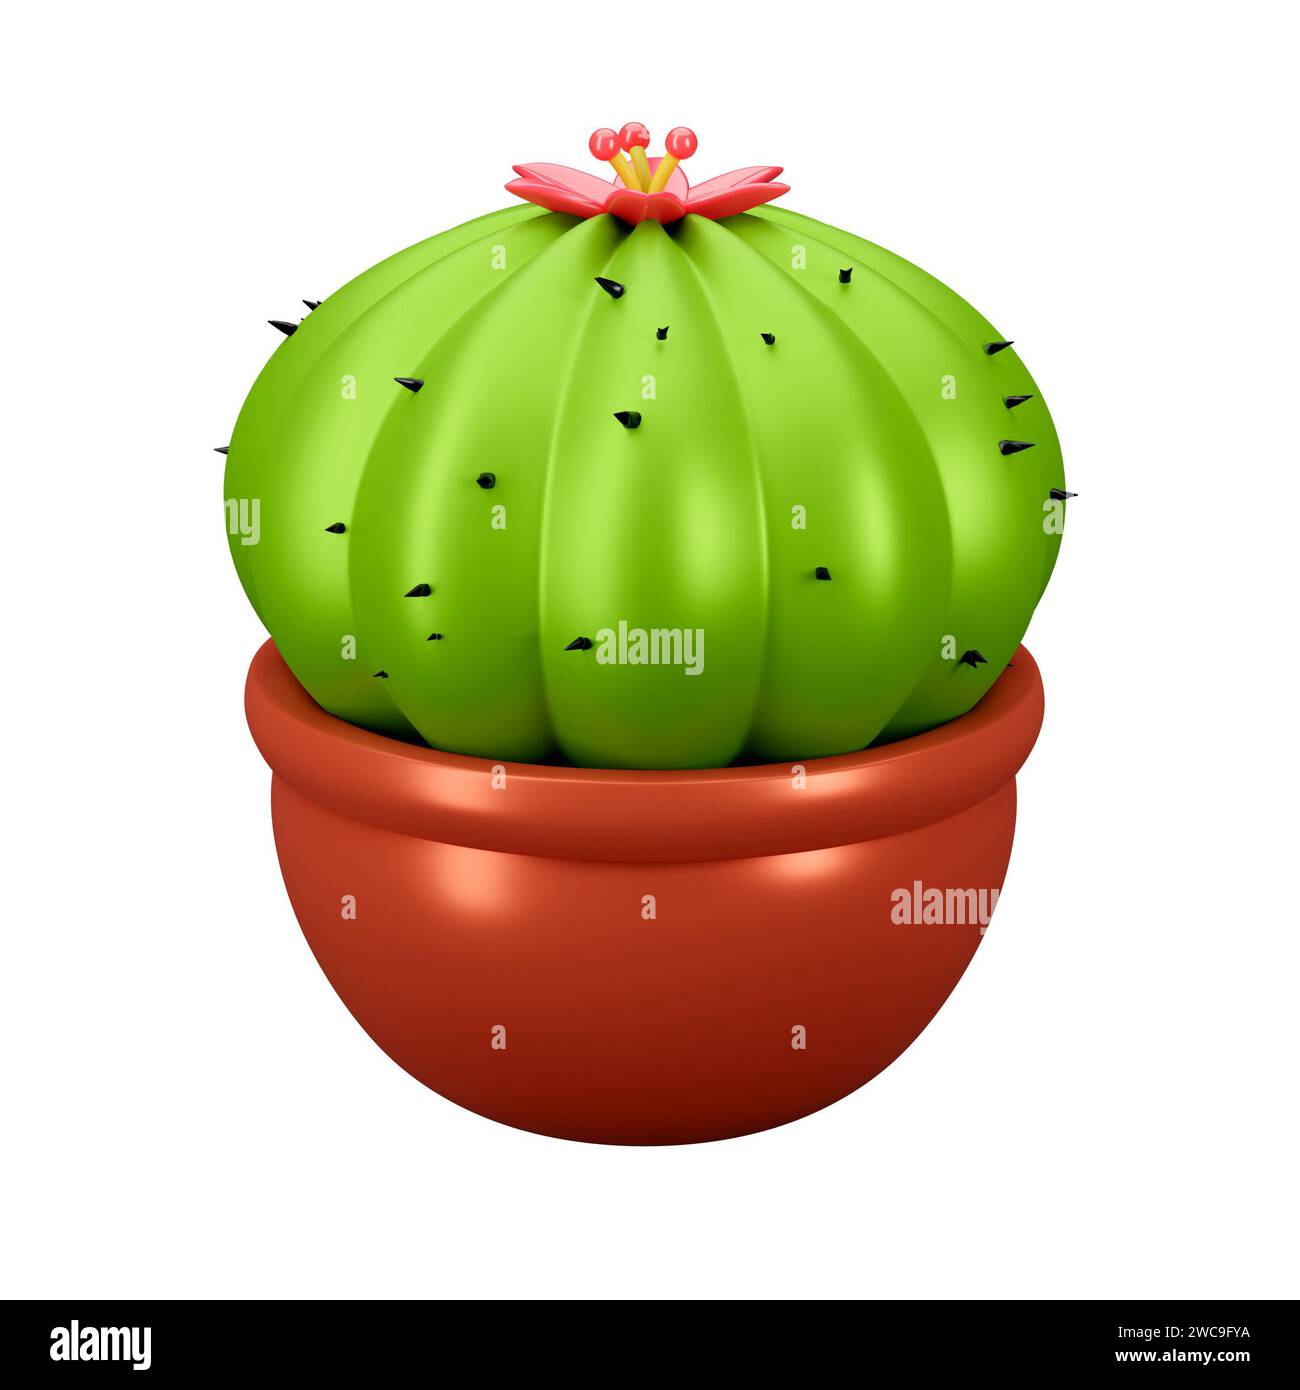 Cactus in a brown pot in a cute style. Stock Photo